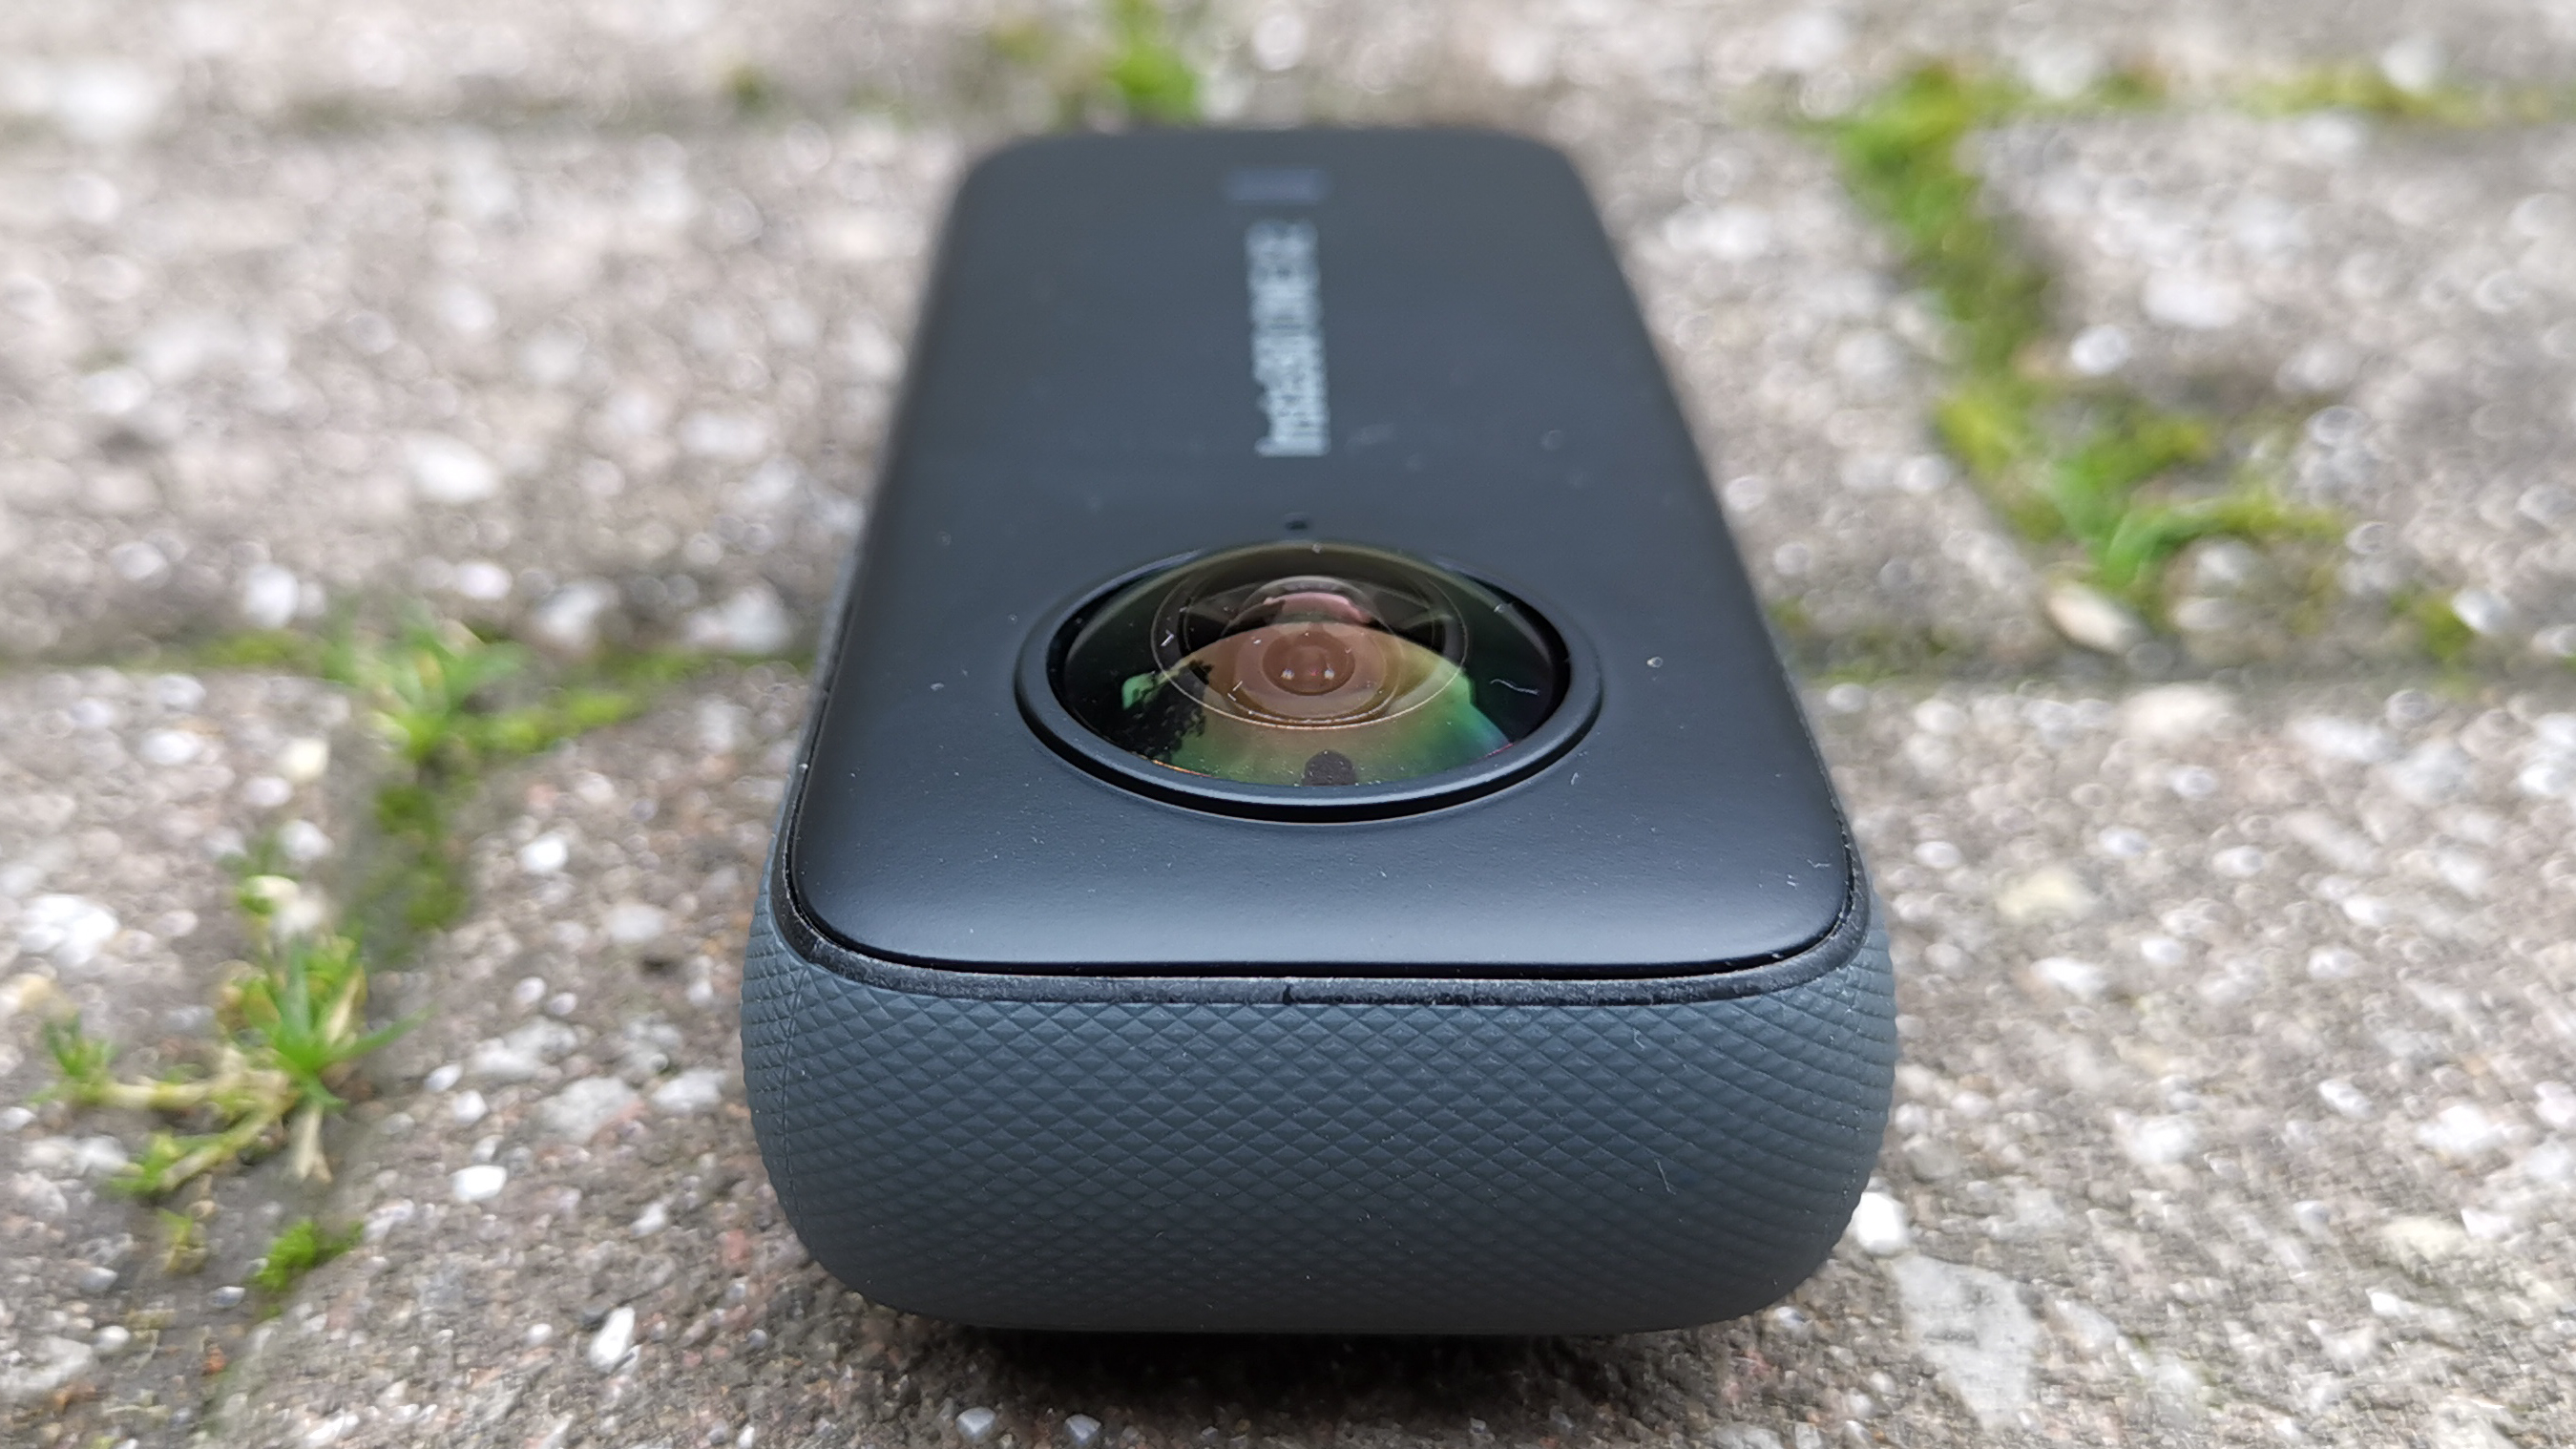 Insta360 One X2 review: a 360º cam packed with special effects and AI  features